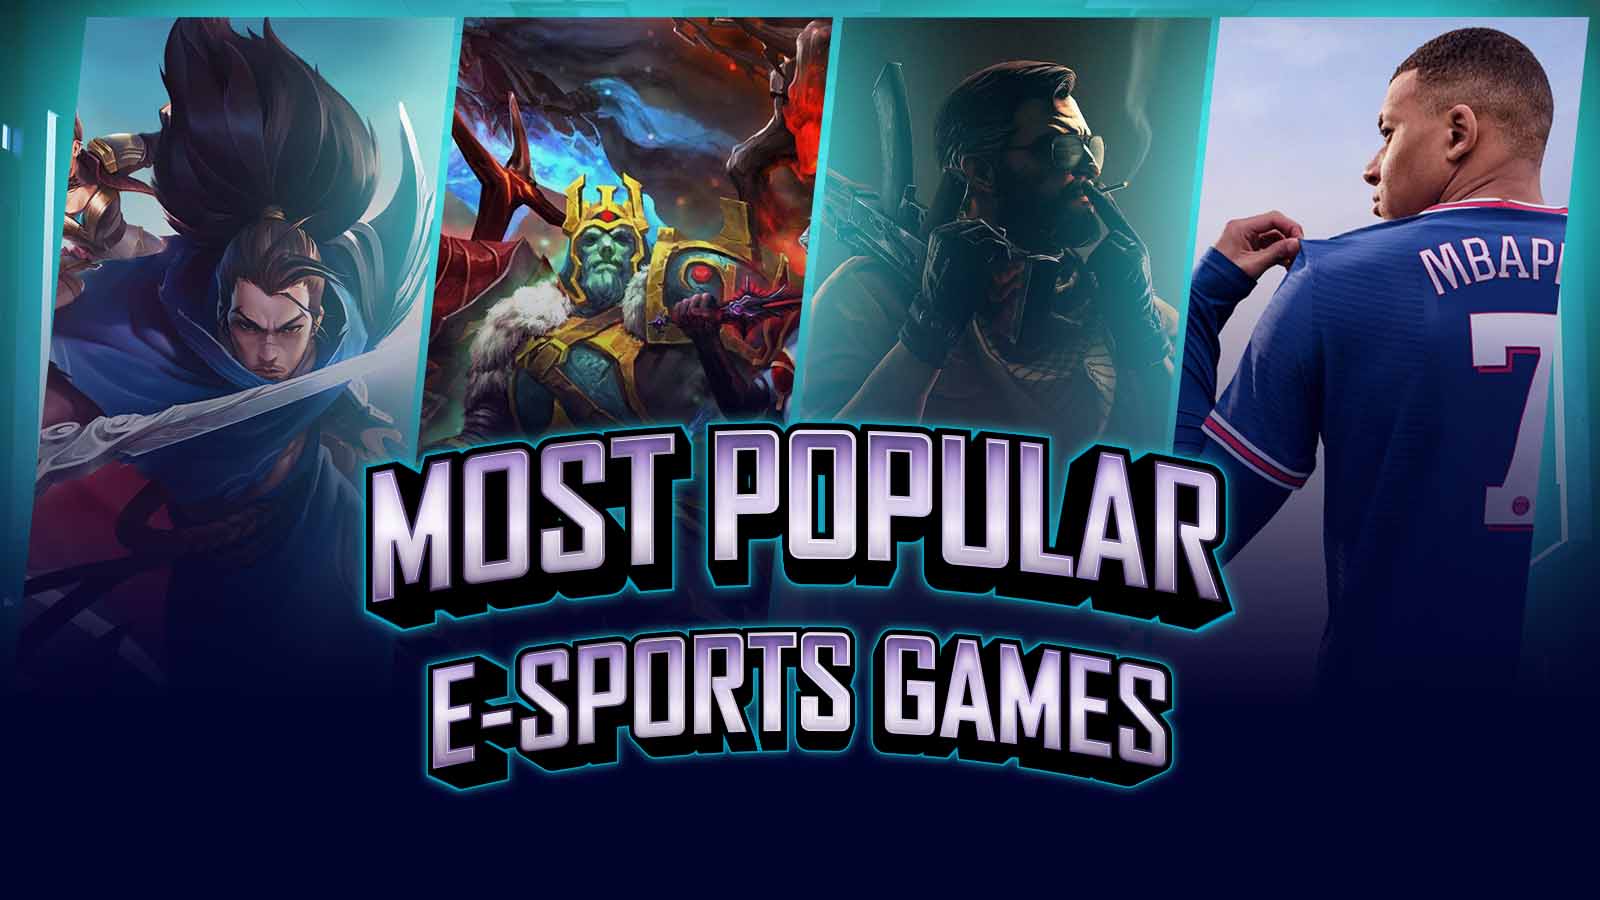 What are the most popular esports games in 2022?